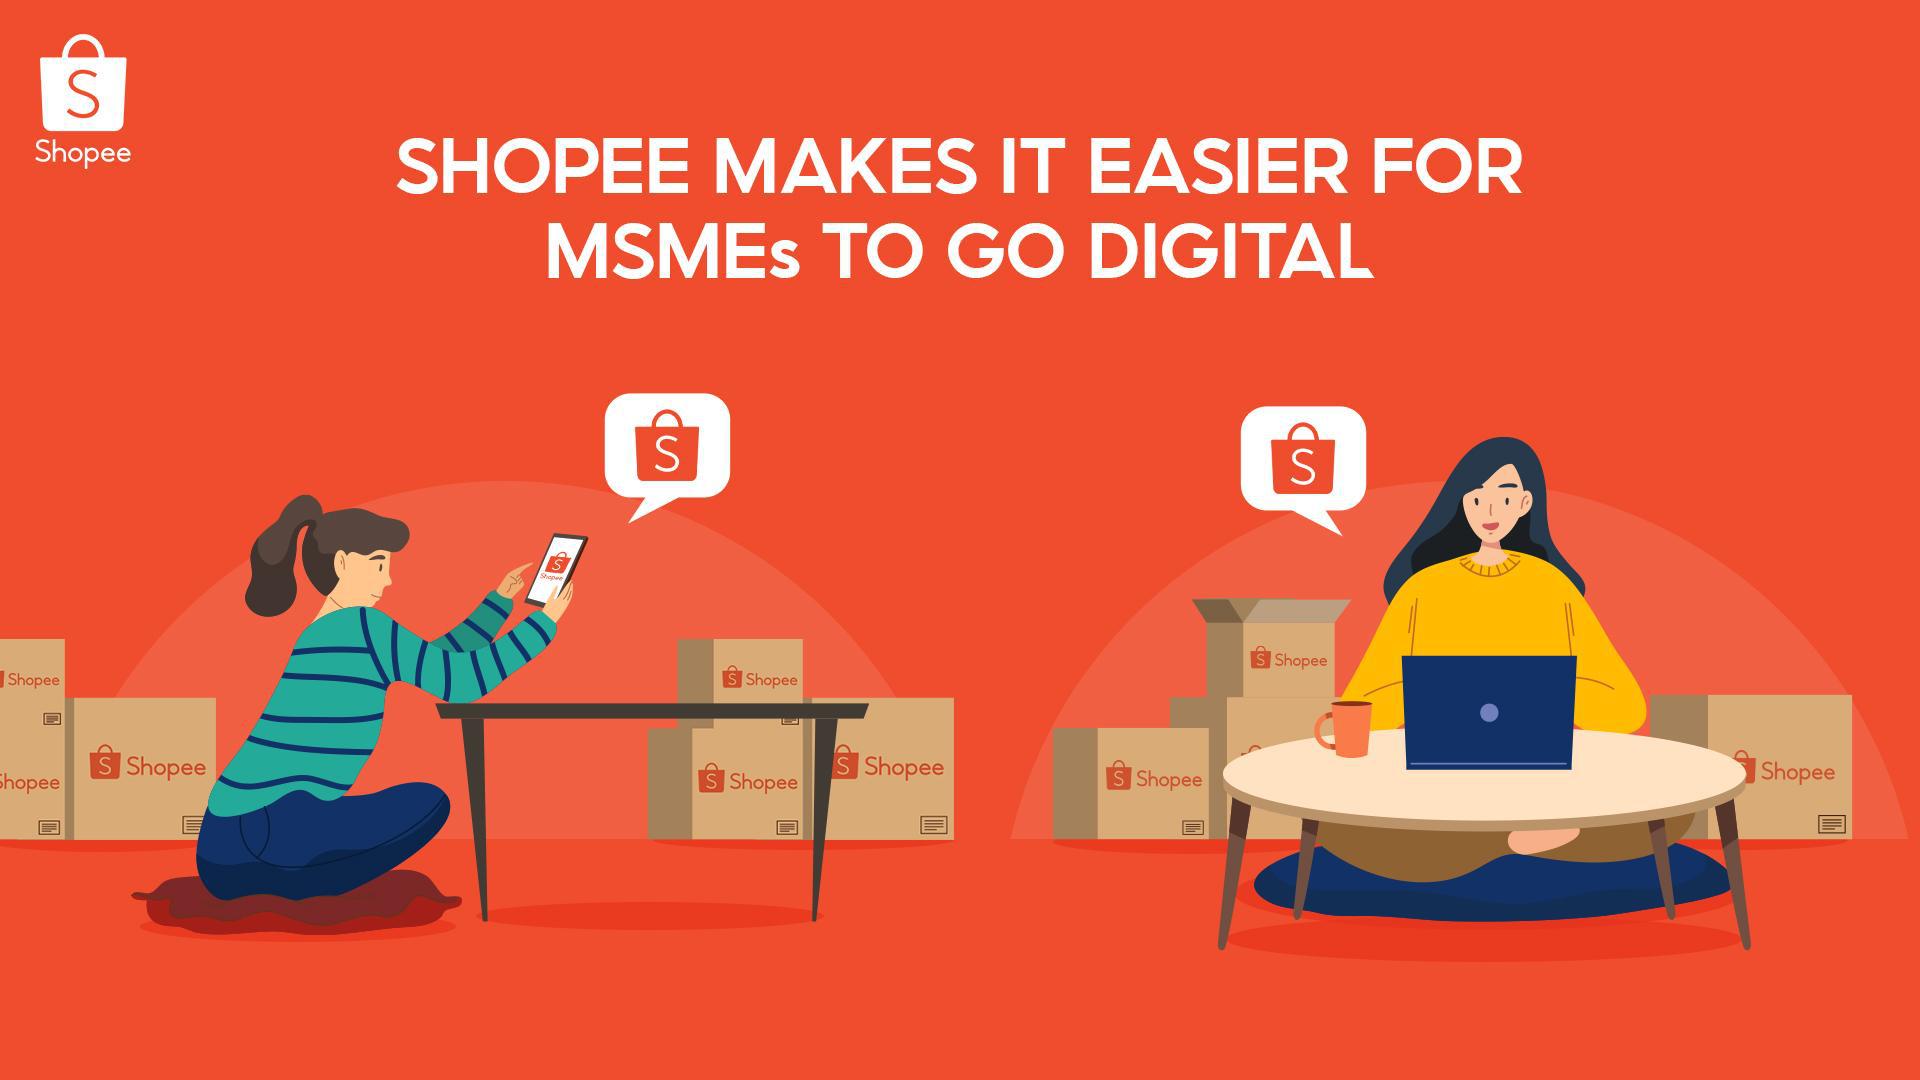 Shopee Supports MSMEs Through Education and Enhanced Tools